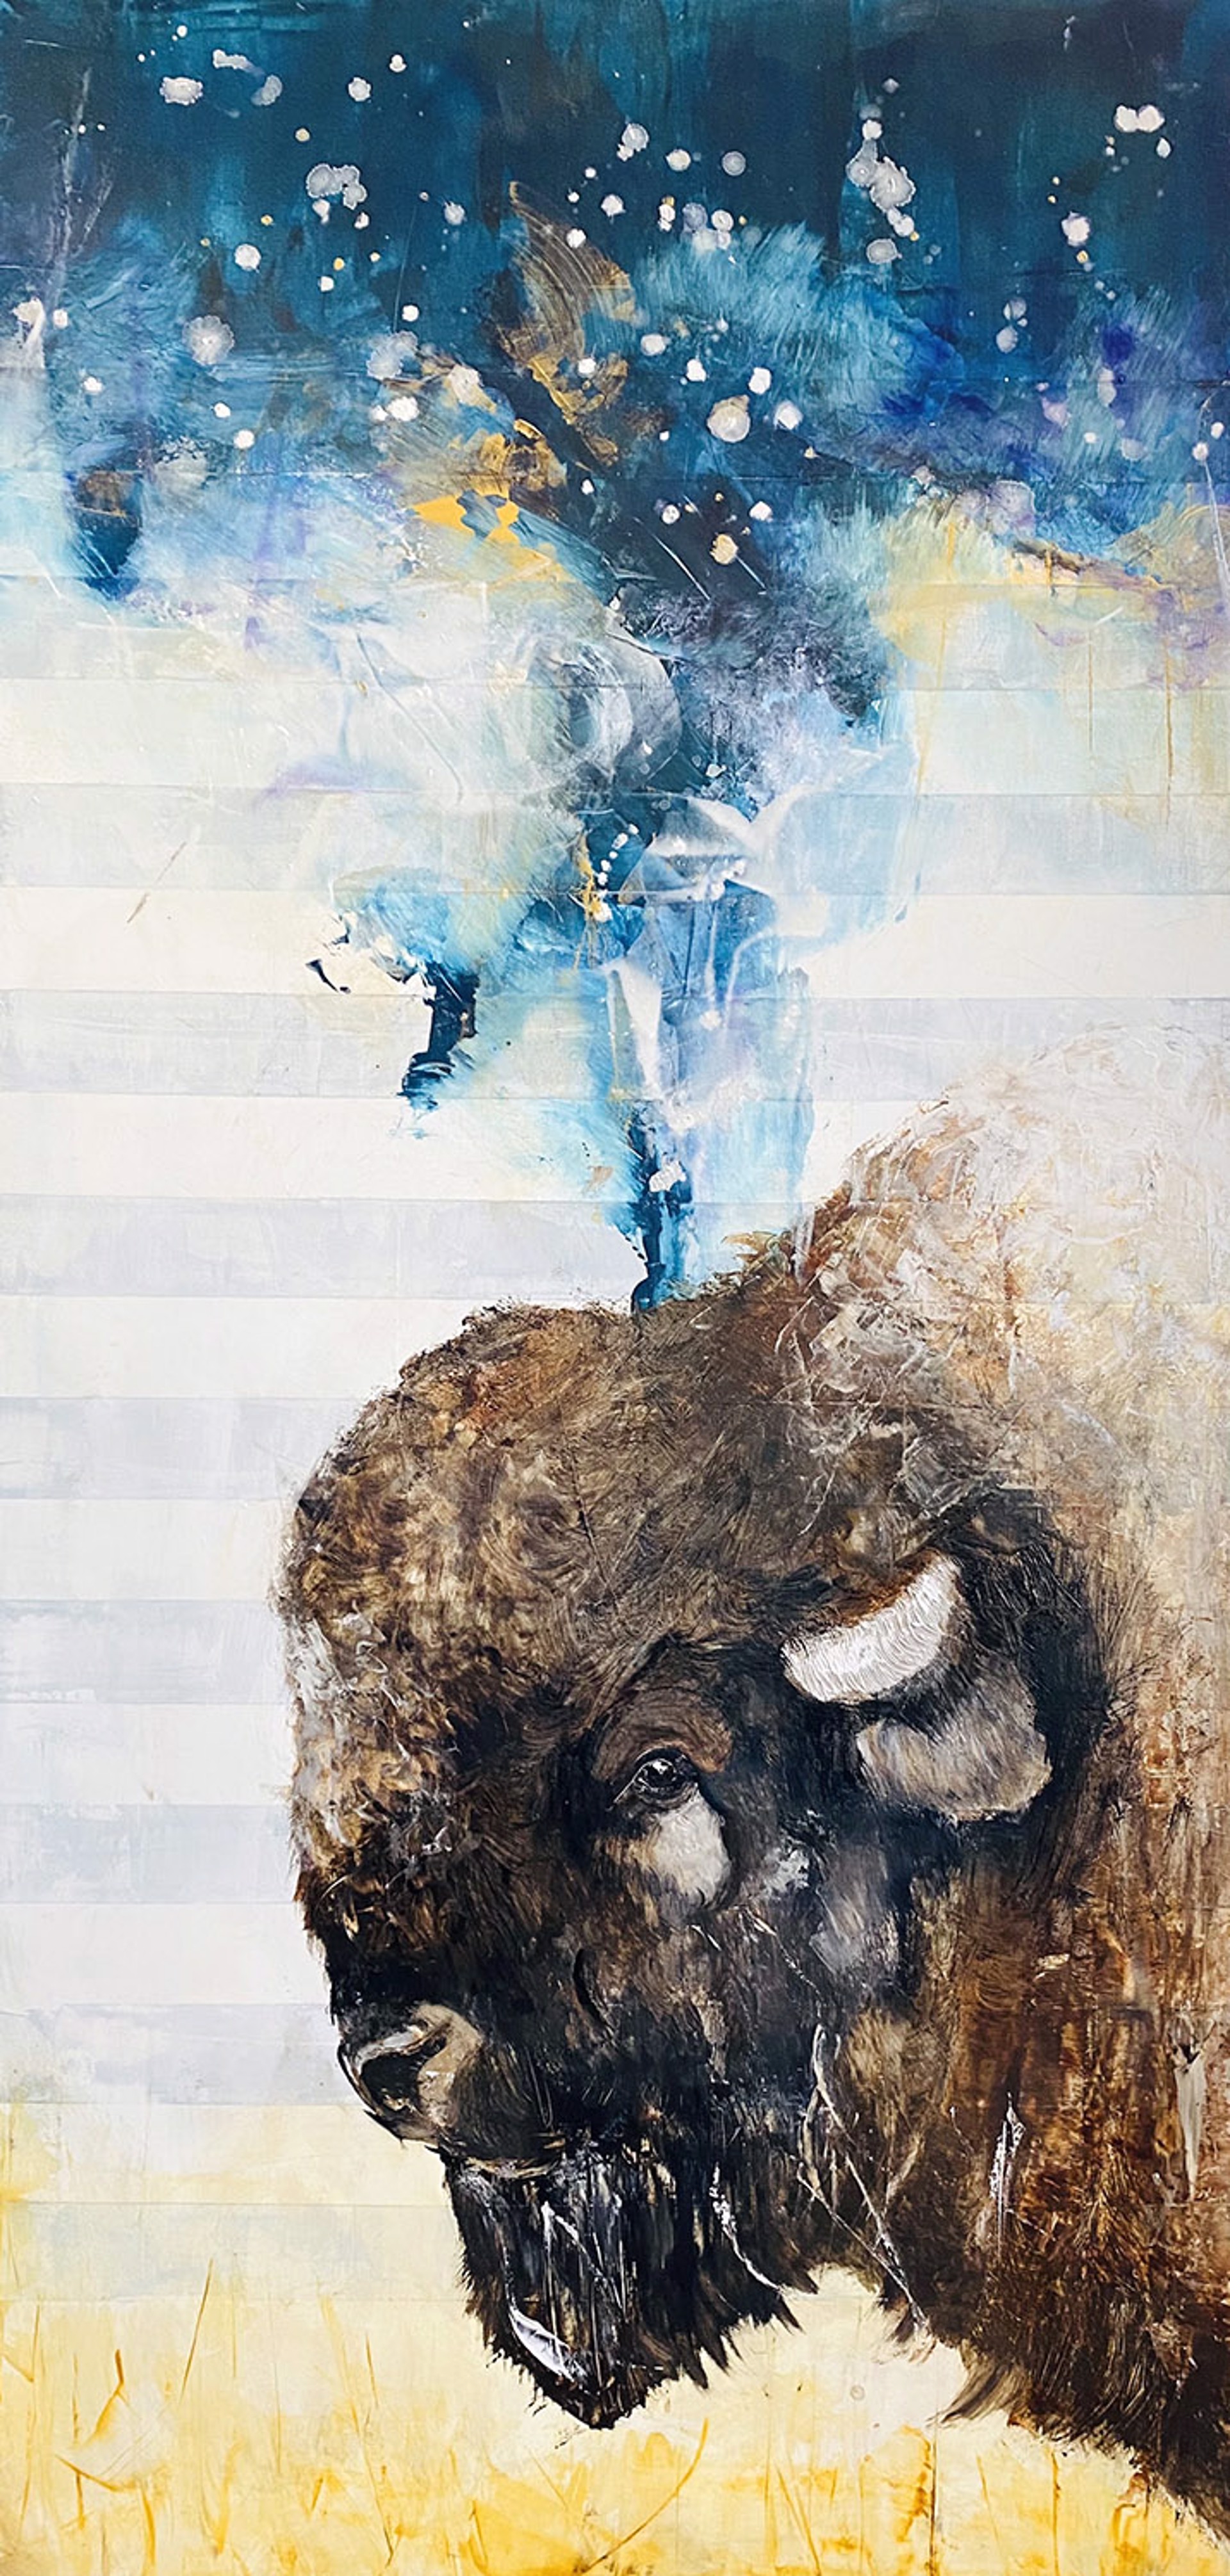 A Contemporary Painting Of A Bison On A White And Grey Striped Background With Blue And Yellow By Jenna Von Benedikt At Gallery Wild